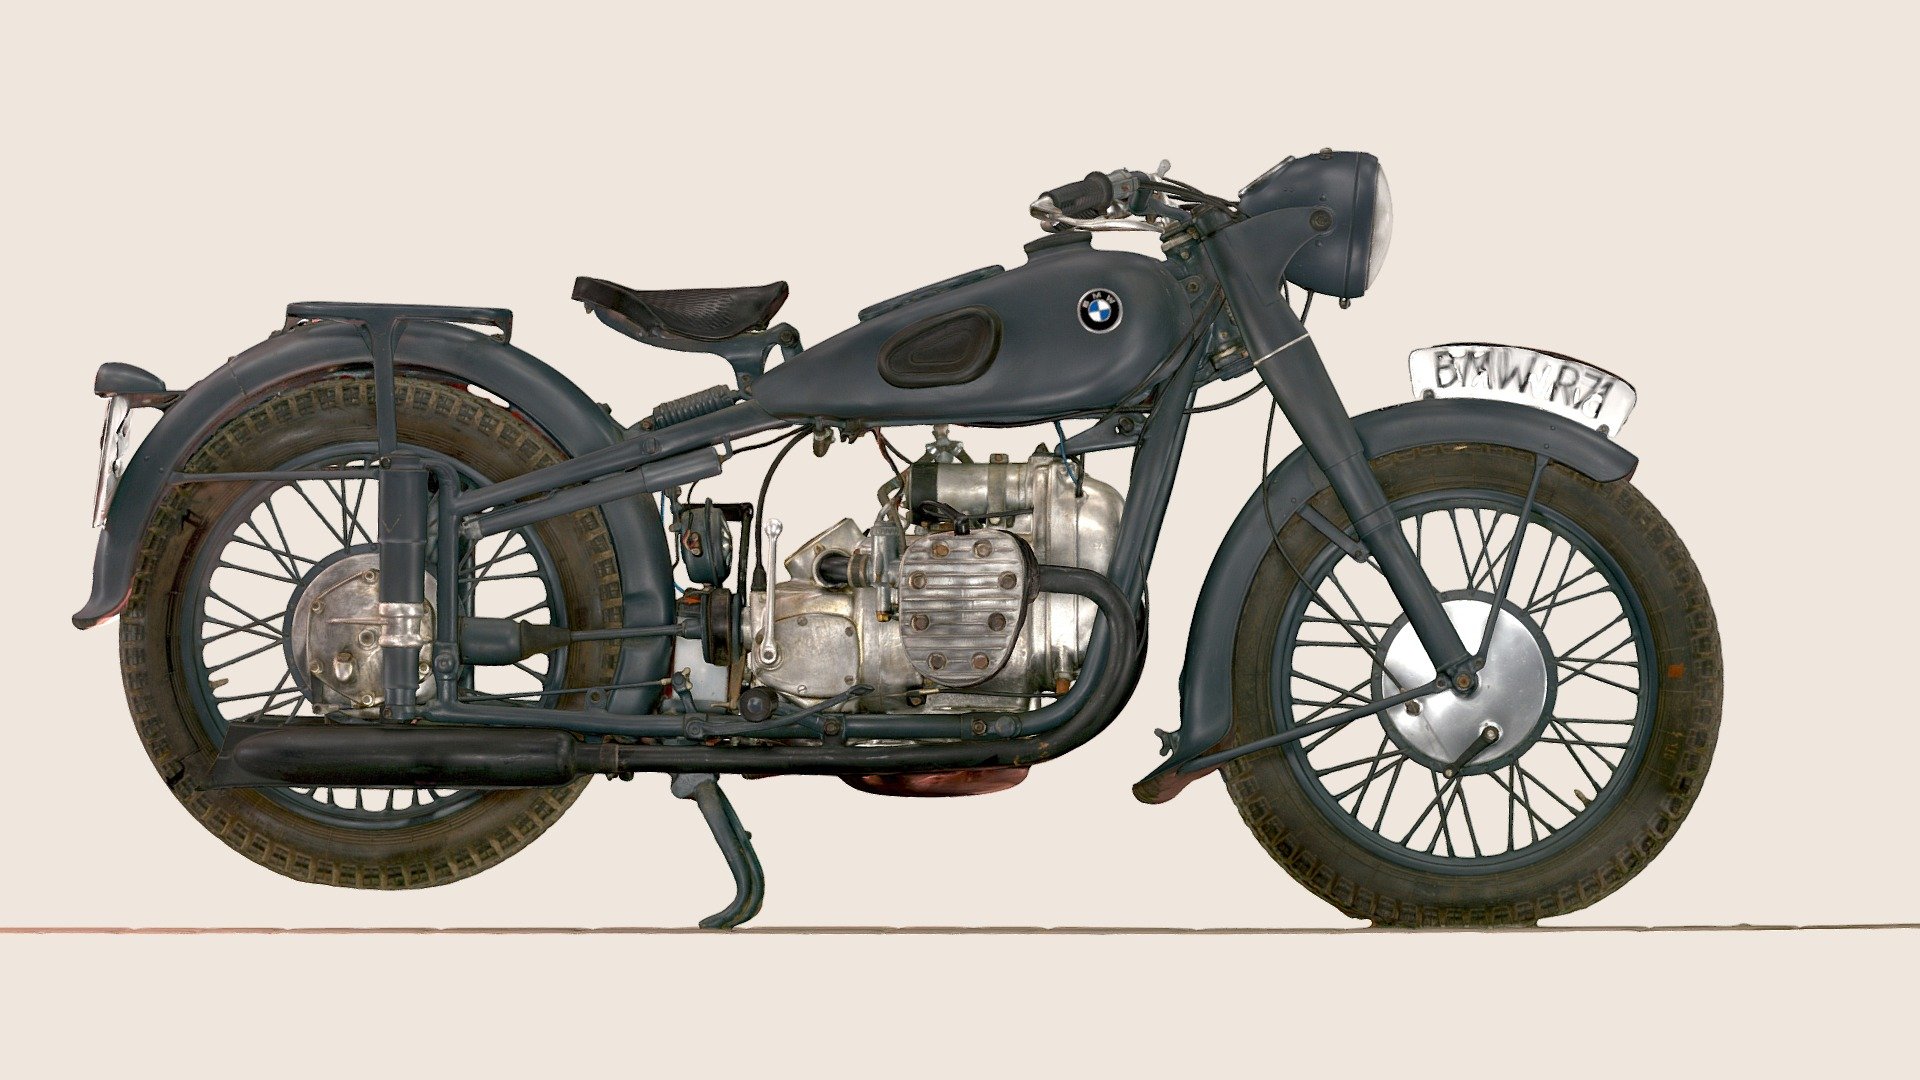 Name: The BMW R 71 746 cc 

Year: 1938

Description: The BMW R 71 746 cc (45.5 cu in ) big flat-twin motorcycle was exceptional. It was the Icon of BMW, expensive to build and well engineered. Unfortunately only 2638 motorcycles could be built before production was disrupted due to the War. Original bikes are now rare and highly sought after. Around 500 are known to survive today.

Technology used: 3D handheld scanner

Made by: Piotr Bialobrzycki

Copyright: Copyright © 2021 FWNDK. All rights reserved 3d model